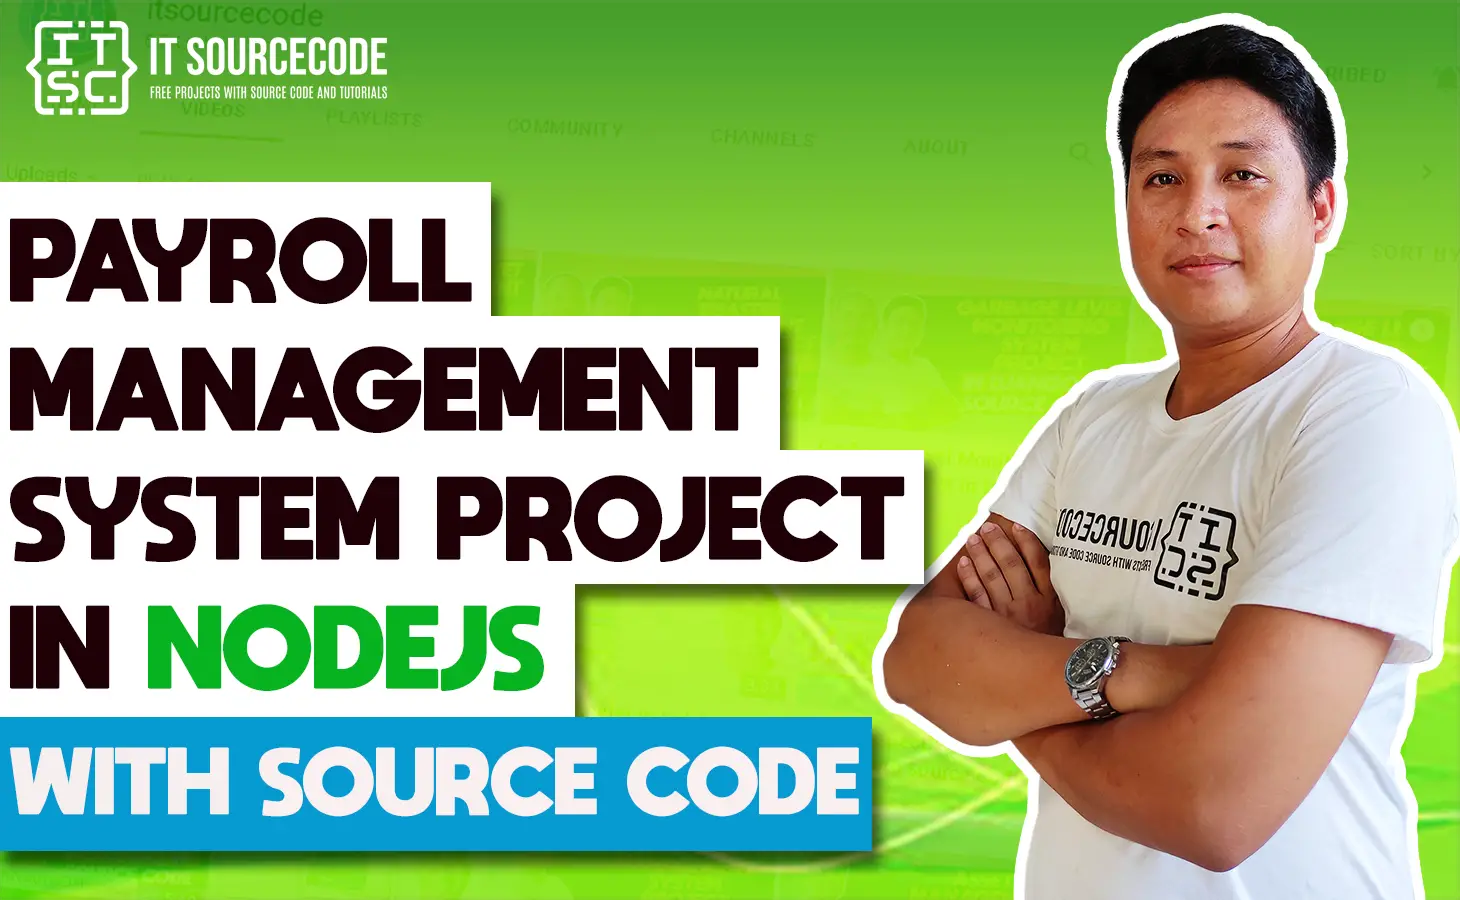 Payroll Management System Project in Node JS with Source Code